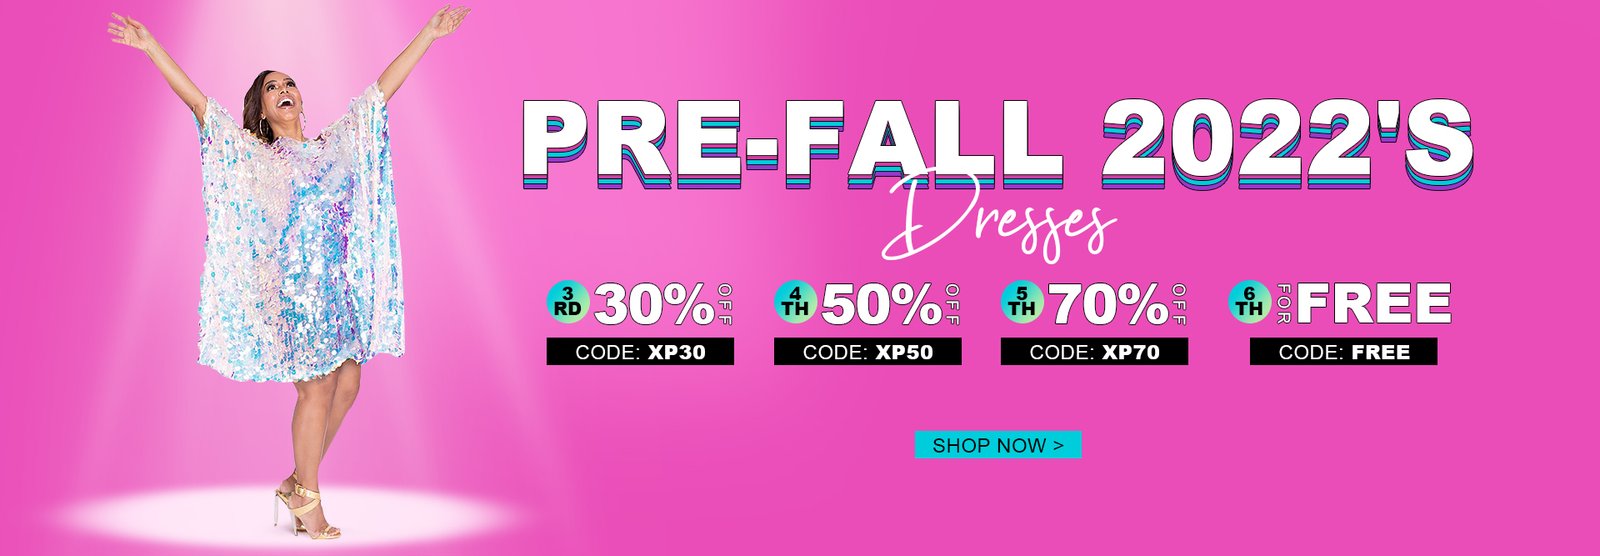 Get up to 70% OFF on Pre-Fall 2022 styles with promo code at Xpluswear